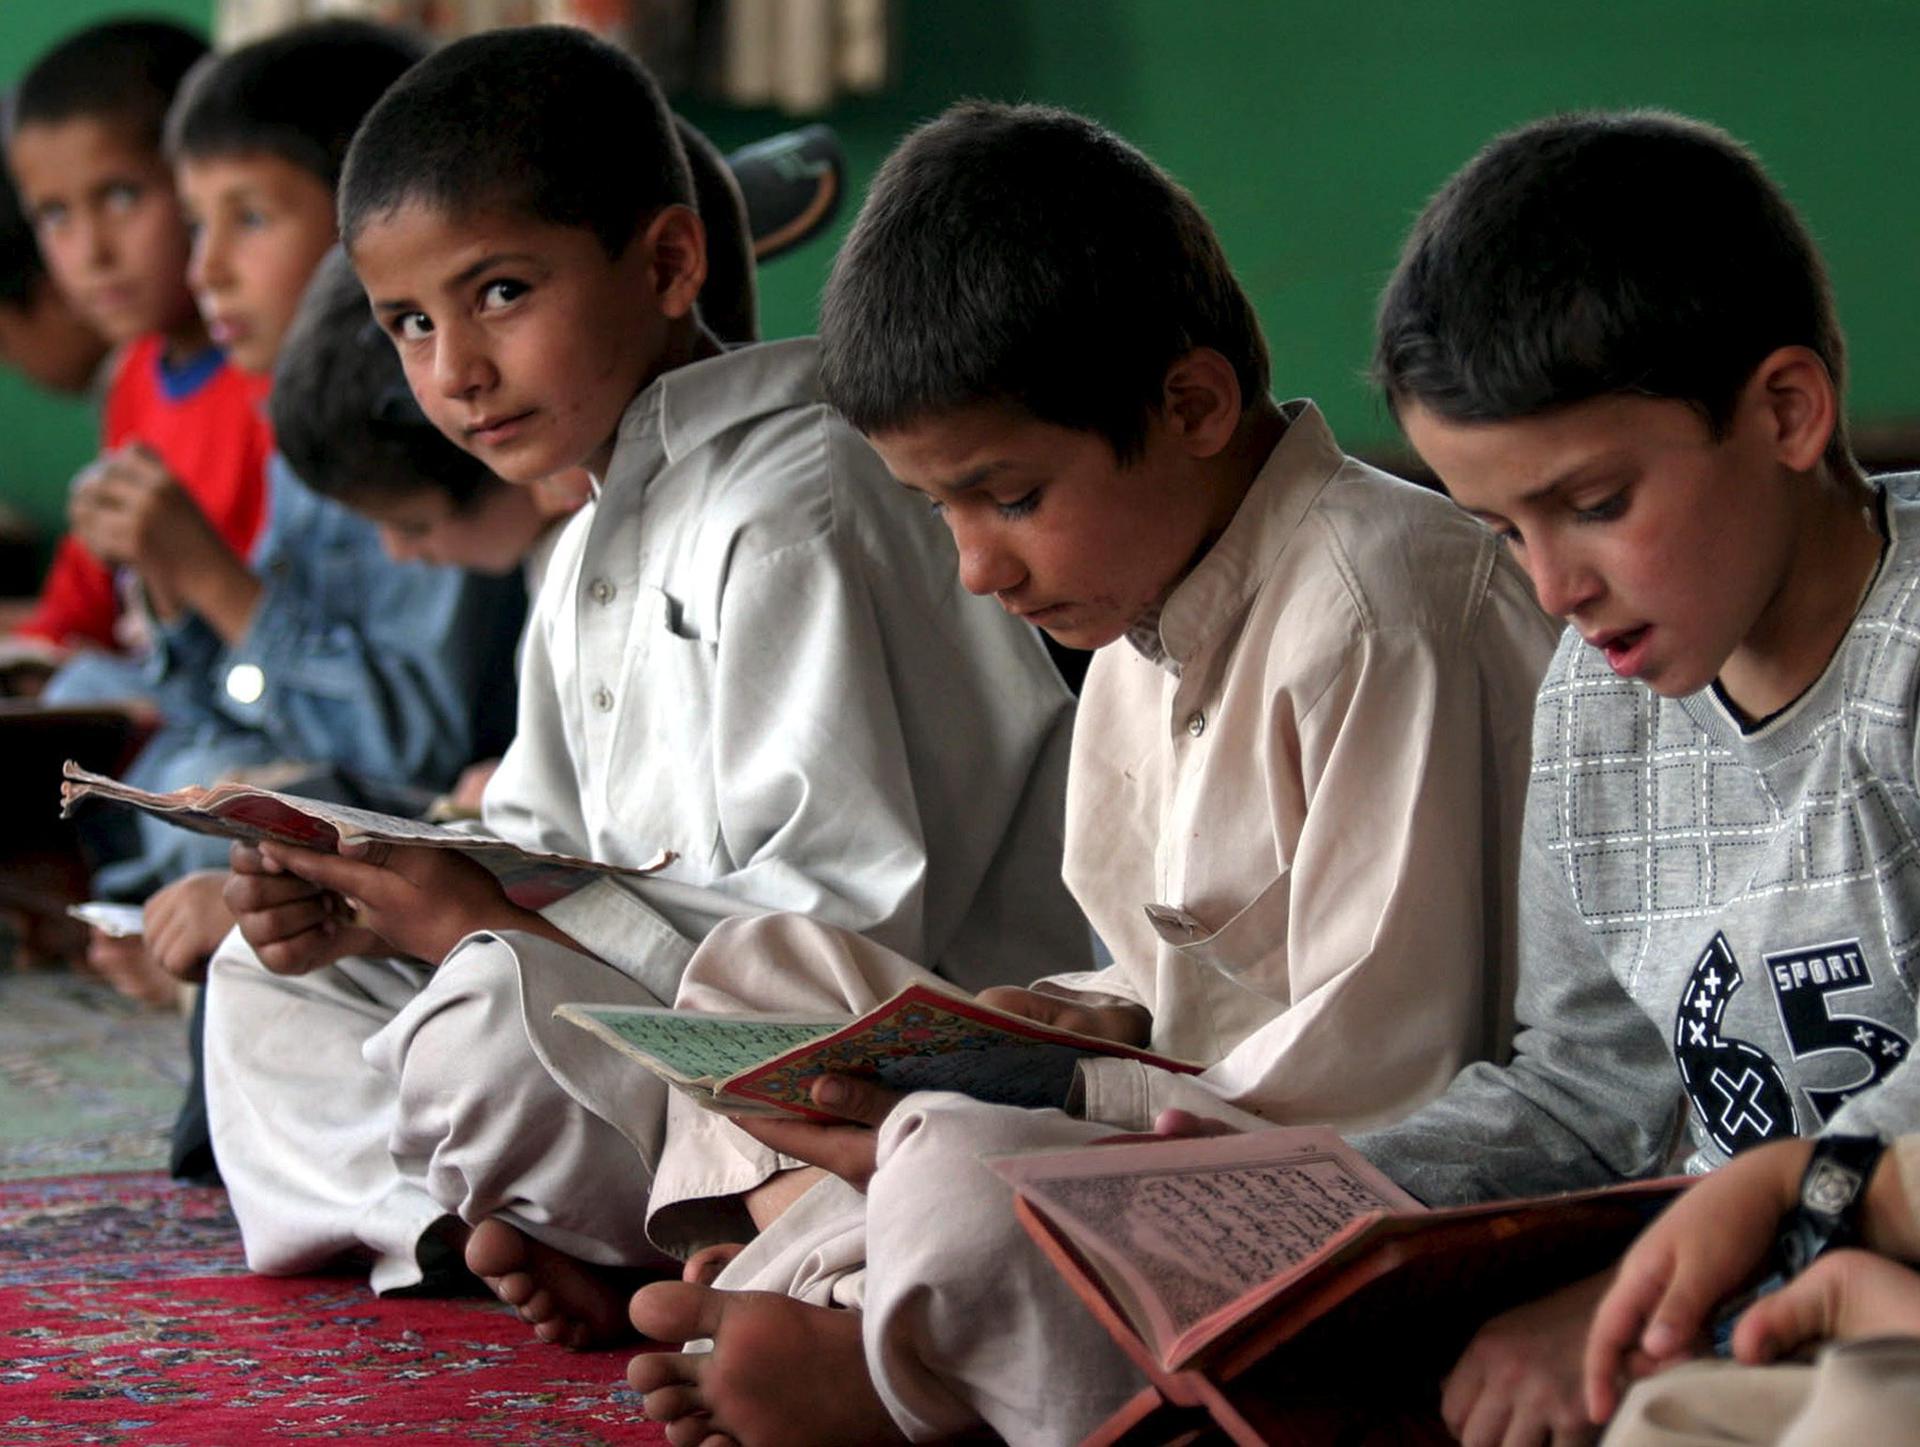 File photo of Afghan children reading the Koran at a school in Kabul.